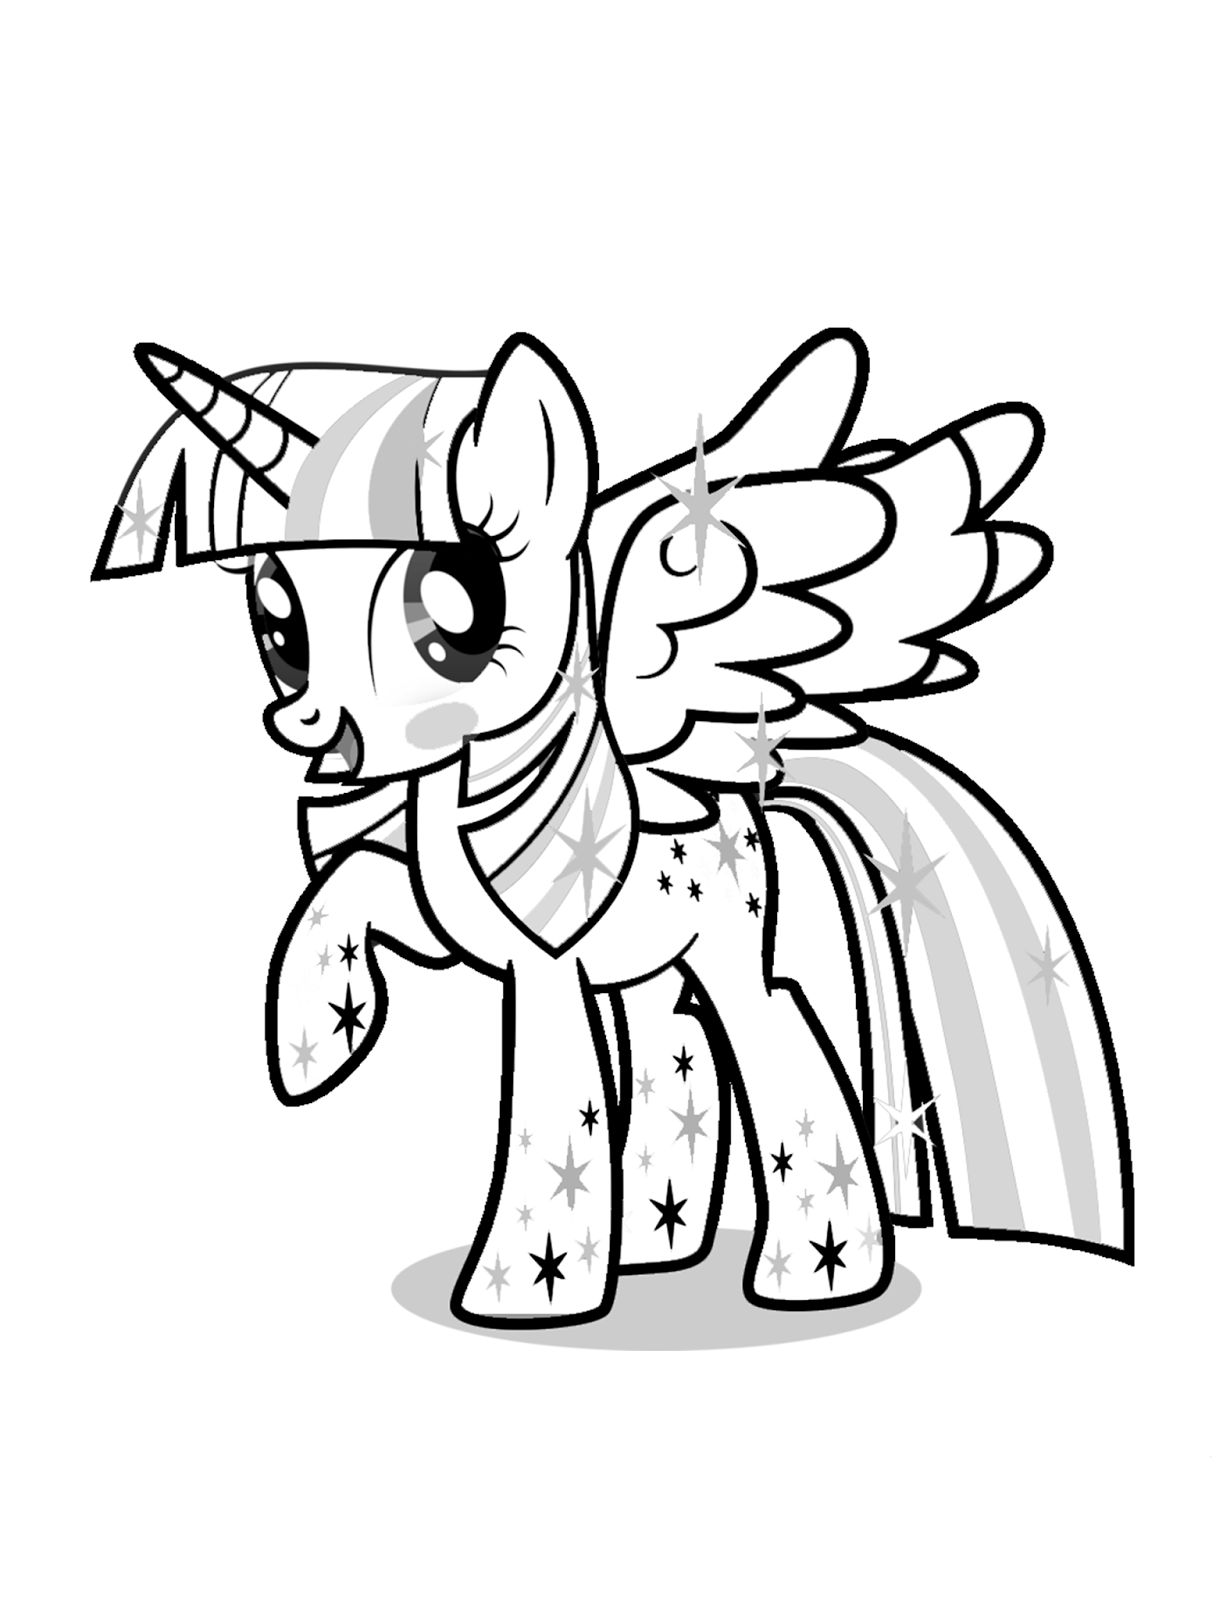 Free Printable Twilight Sparkle Coloring Pages - Printable Word Searches